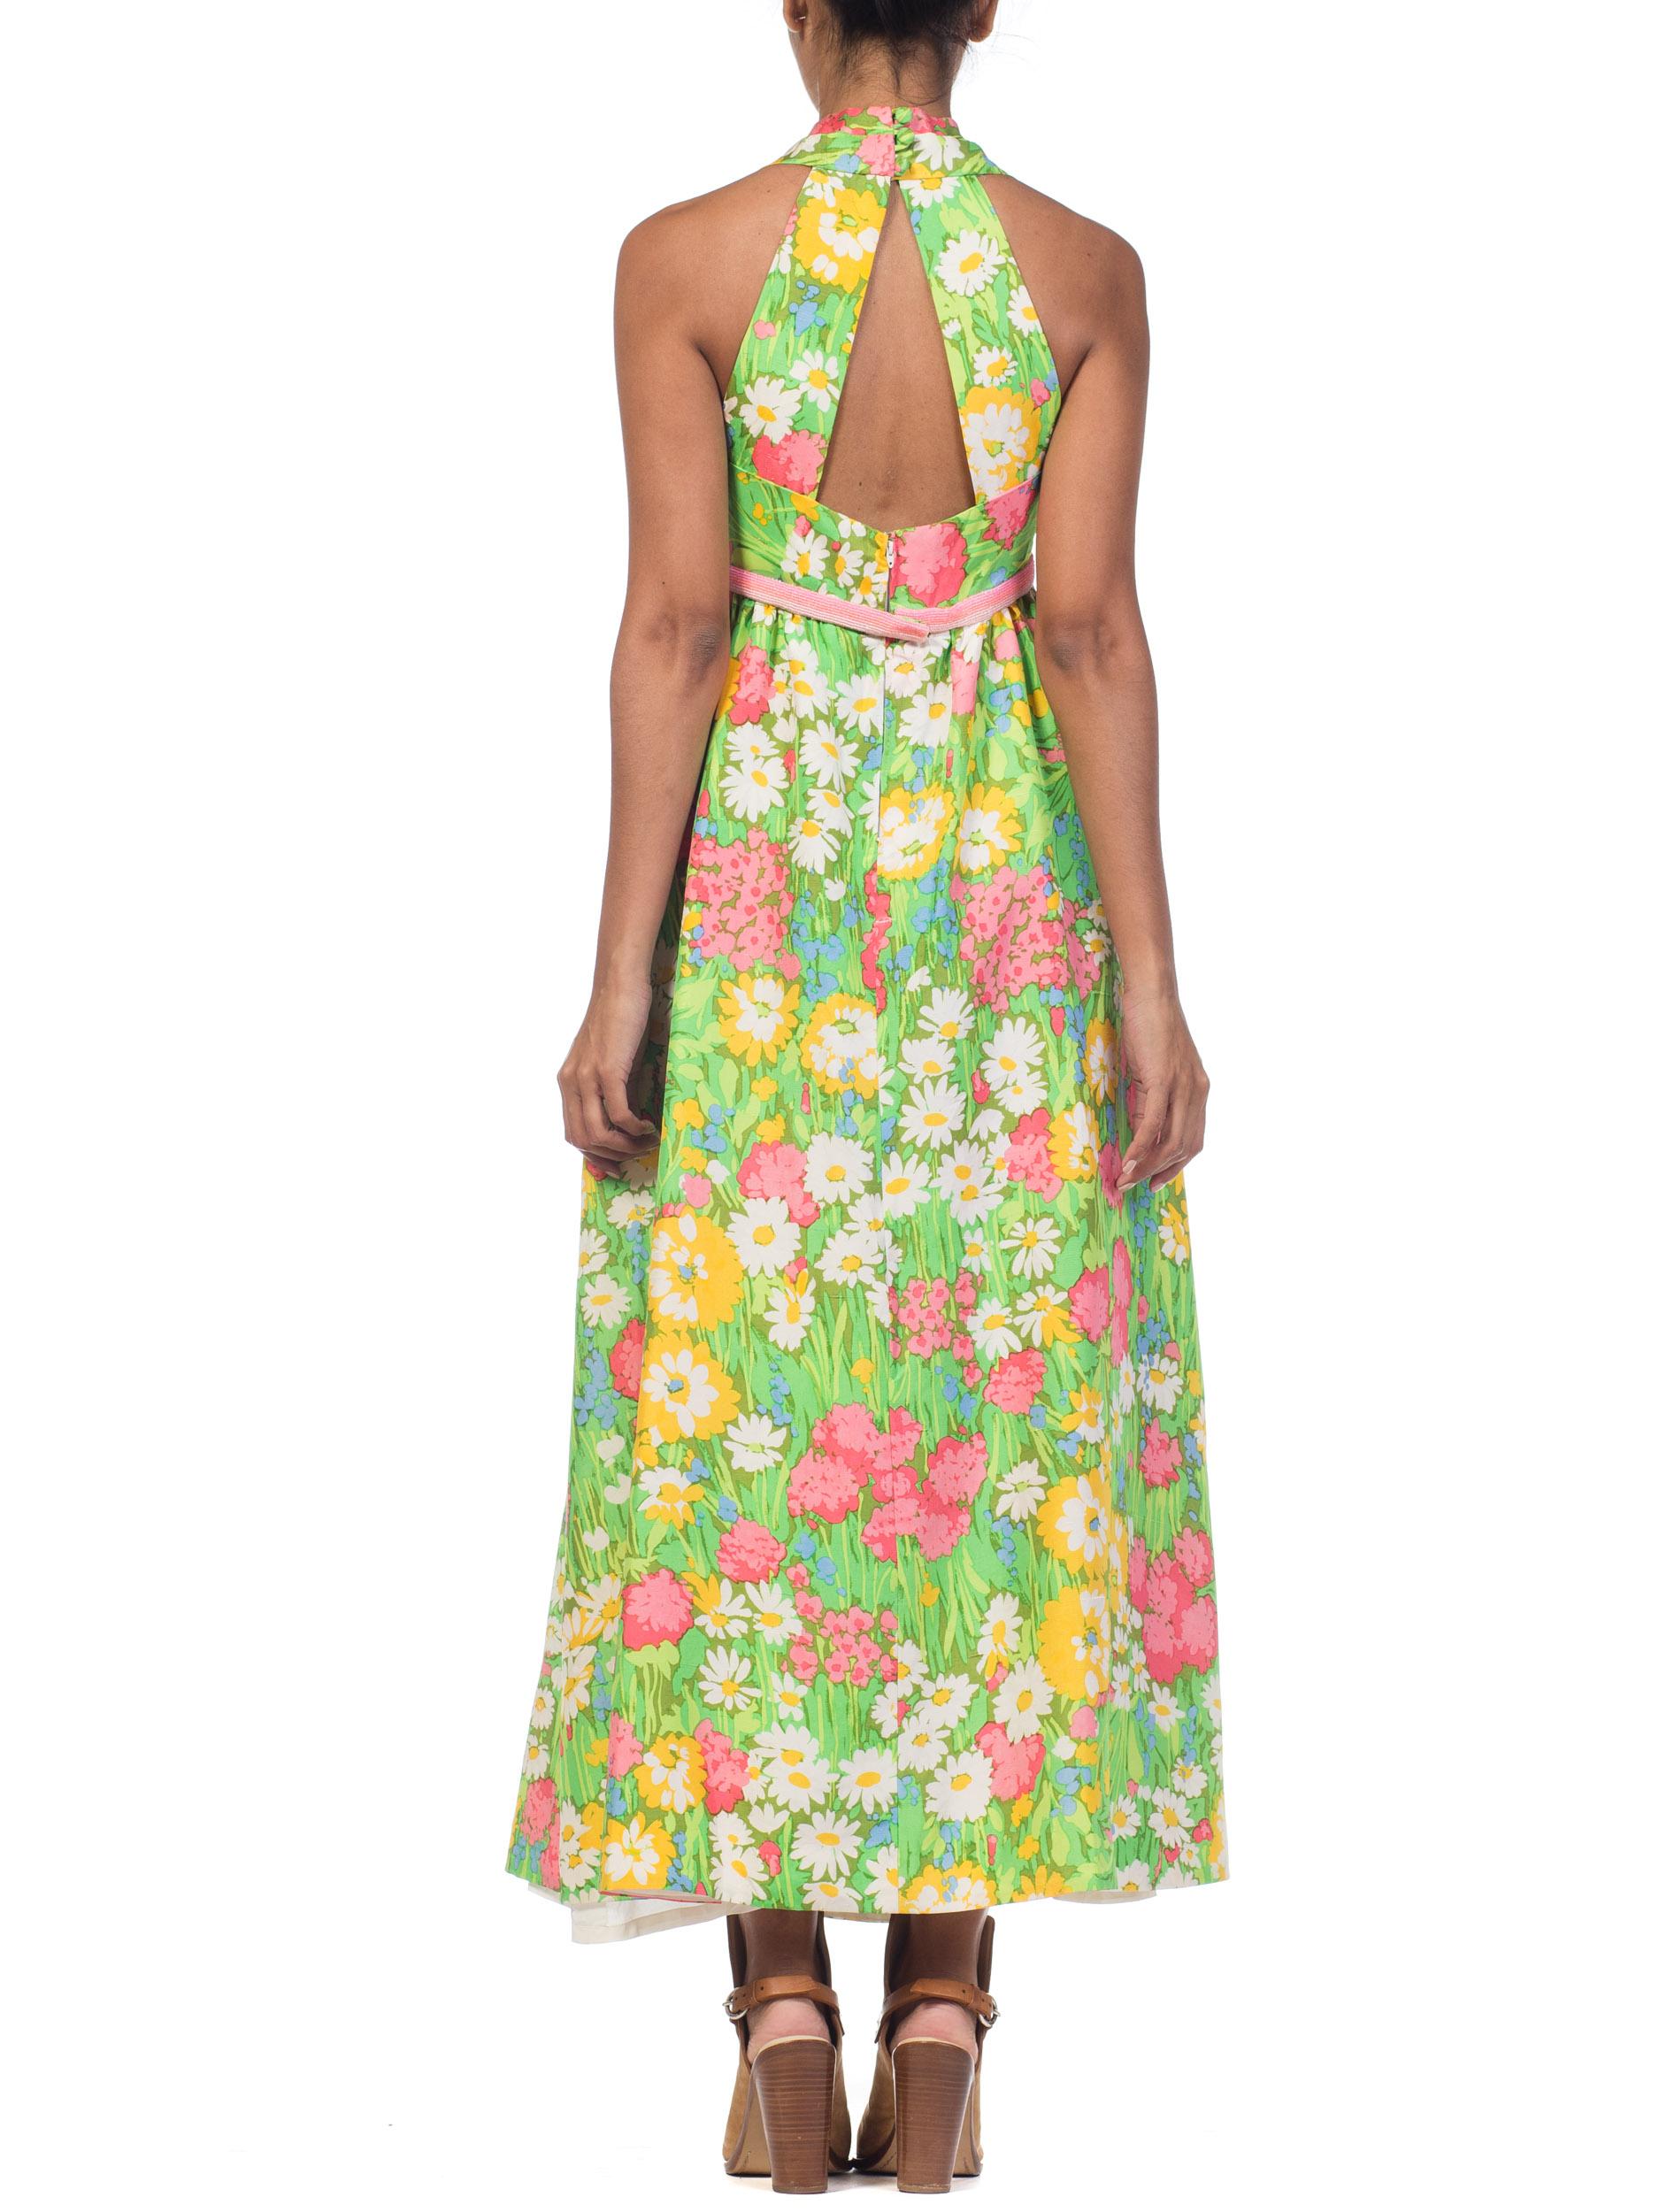 1960s 1970s Floral Printed Silk Halter Dress with Beading 7